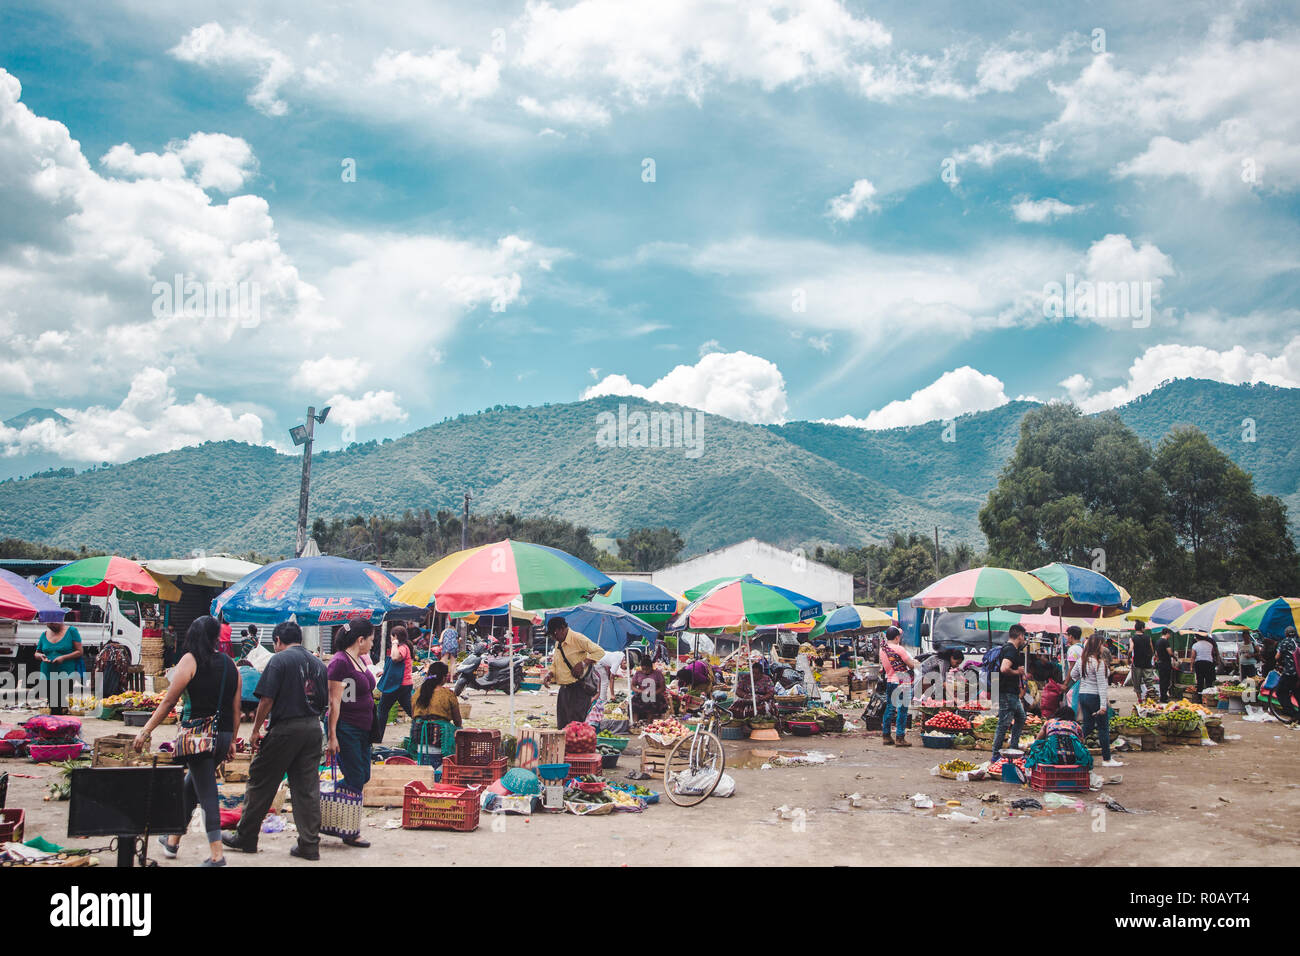 Vibrant food market stalls laid out on the floor by women in traditional Mayan dress under colorful parasol umbrellas in Antigua, Guatemala Stock Photo